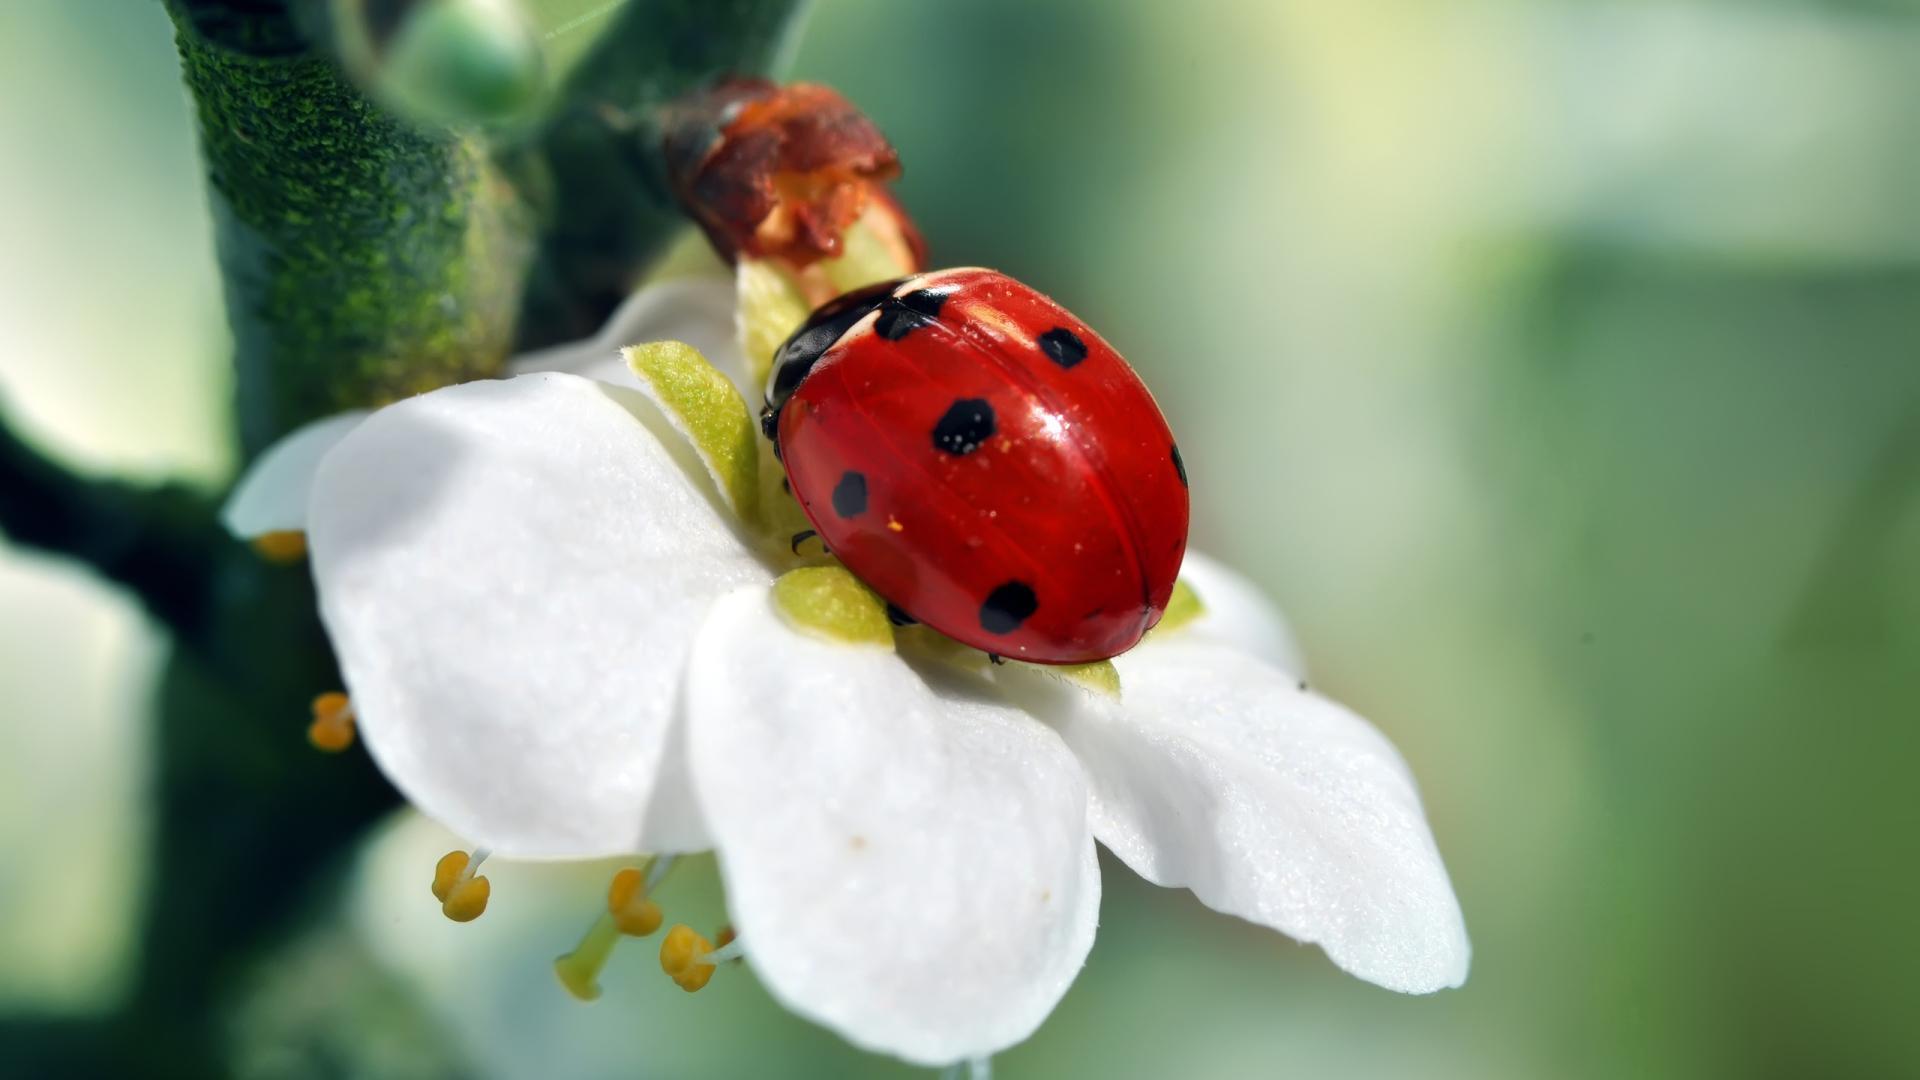 Ladybug Live Wallpaper for Android